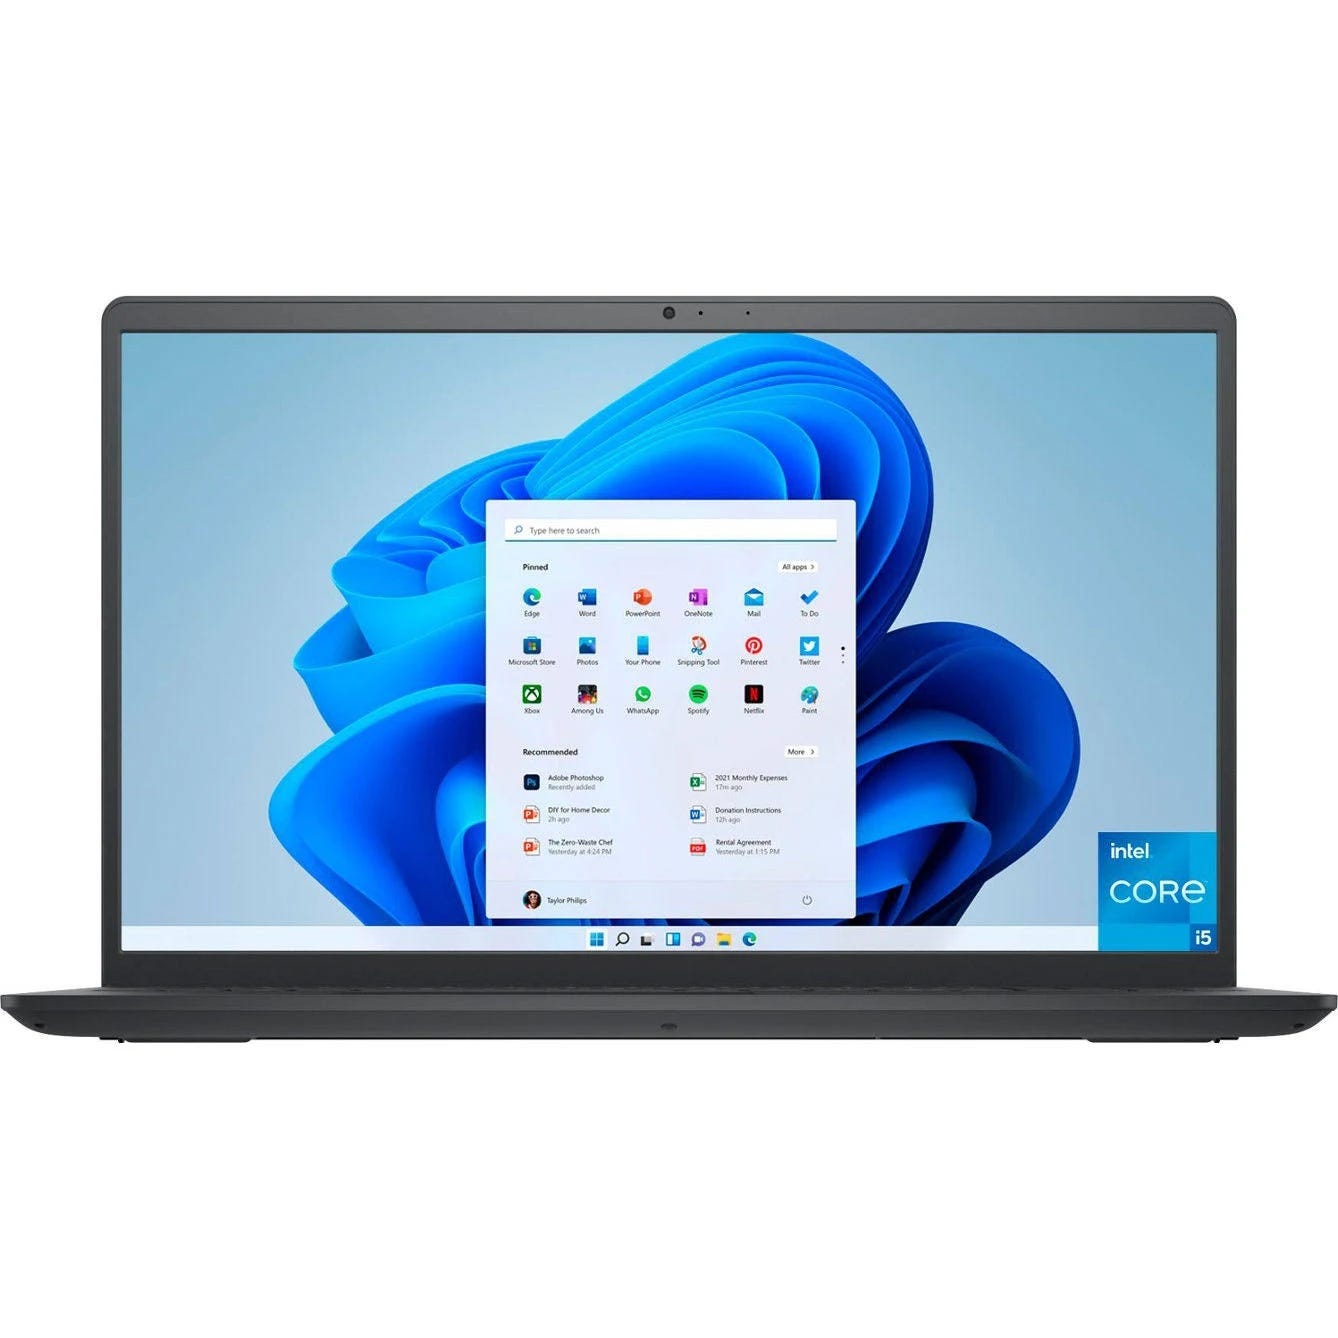 Dell Inspiron 3511: Touchscreen Laptop with Intel Core i5 Processor and 8GB Memory | Image